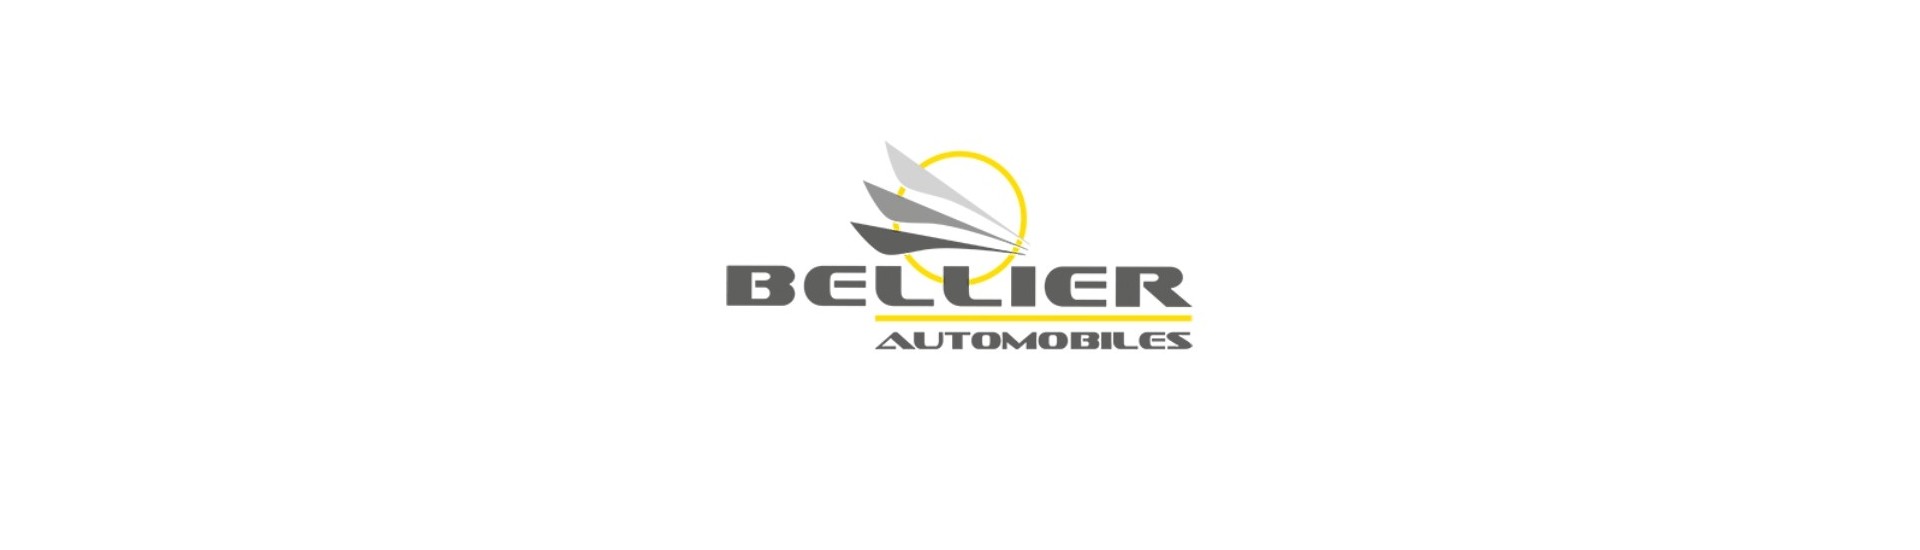 Exhaust collector at the best car price without a permit Bellier